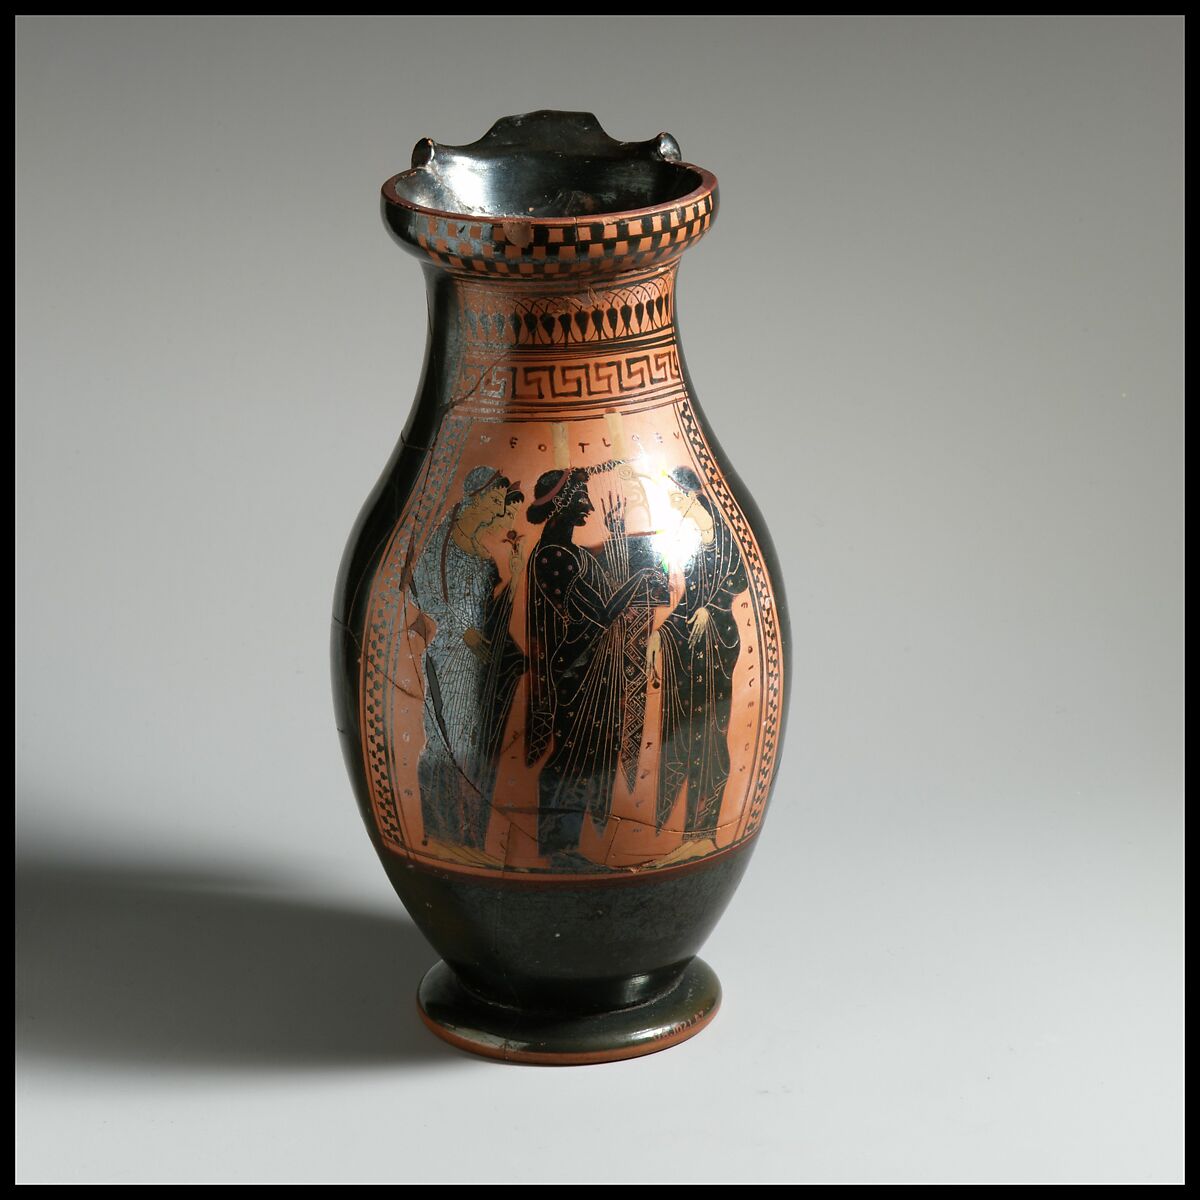 Terracotta oinochoe: olpe (round-mouthed jug), Possibly by the Euphiletos Painter, Terracotta, Greek, Attic 